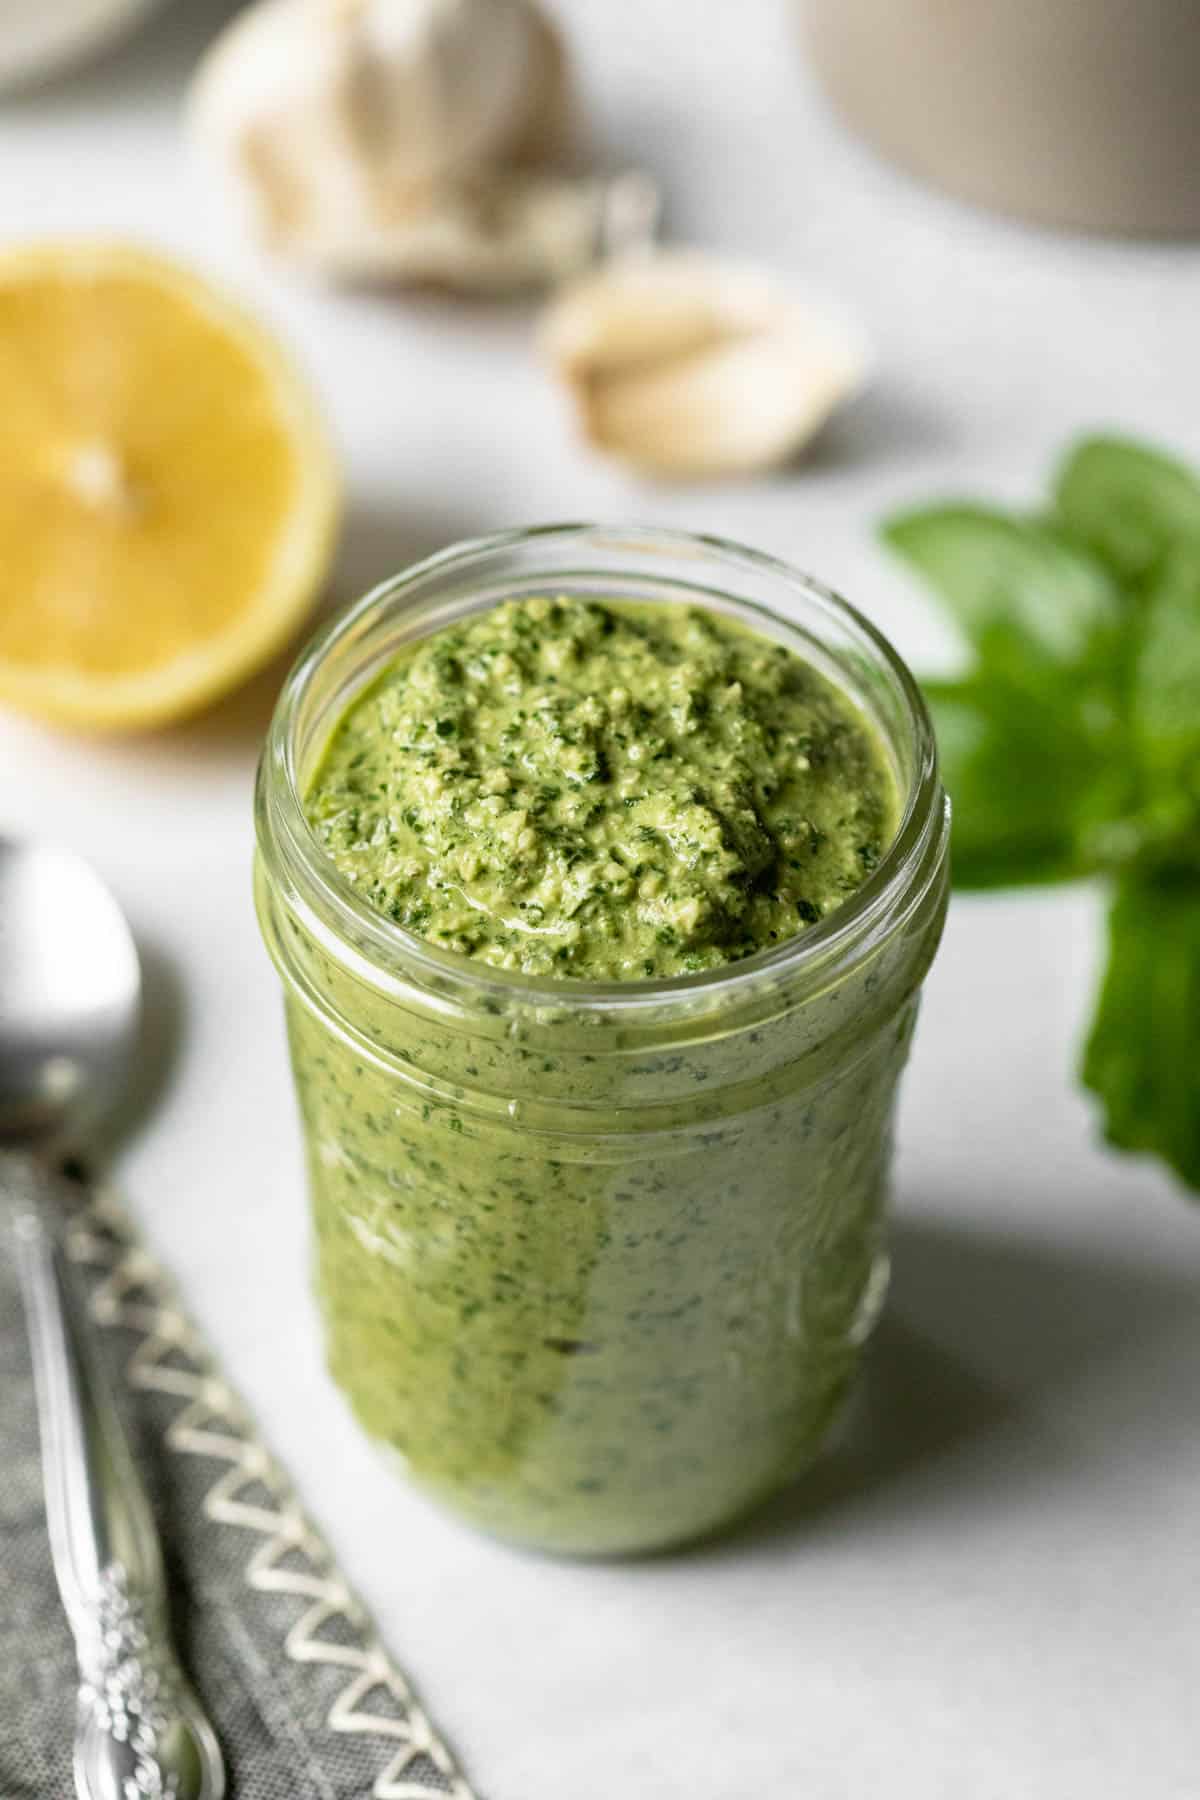 bright green fresh vegan pesto in a small glass jar with lemon, garlic, and basil in background.